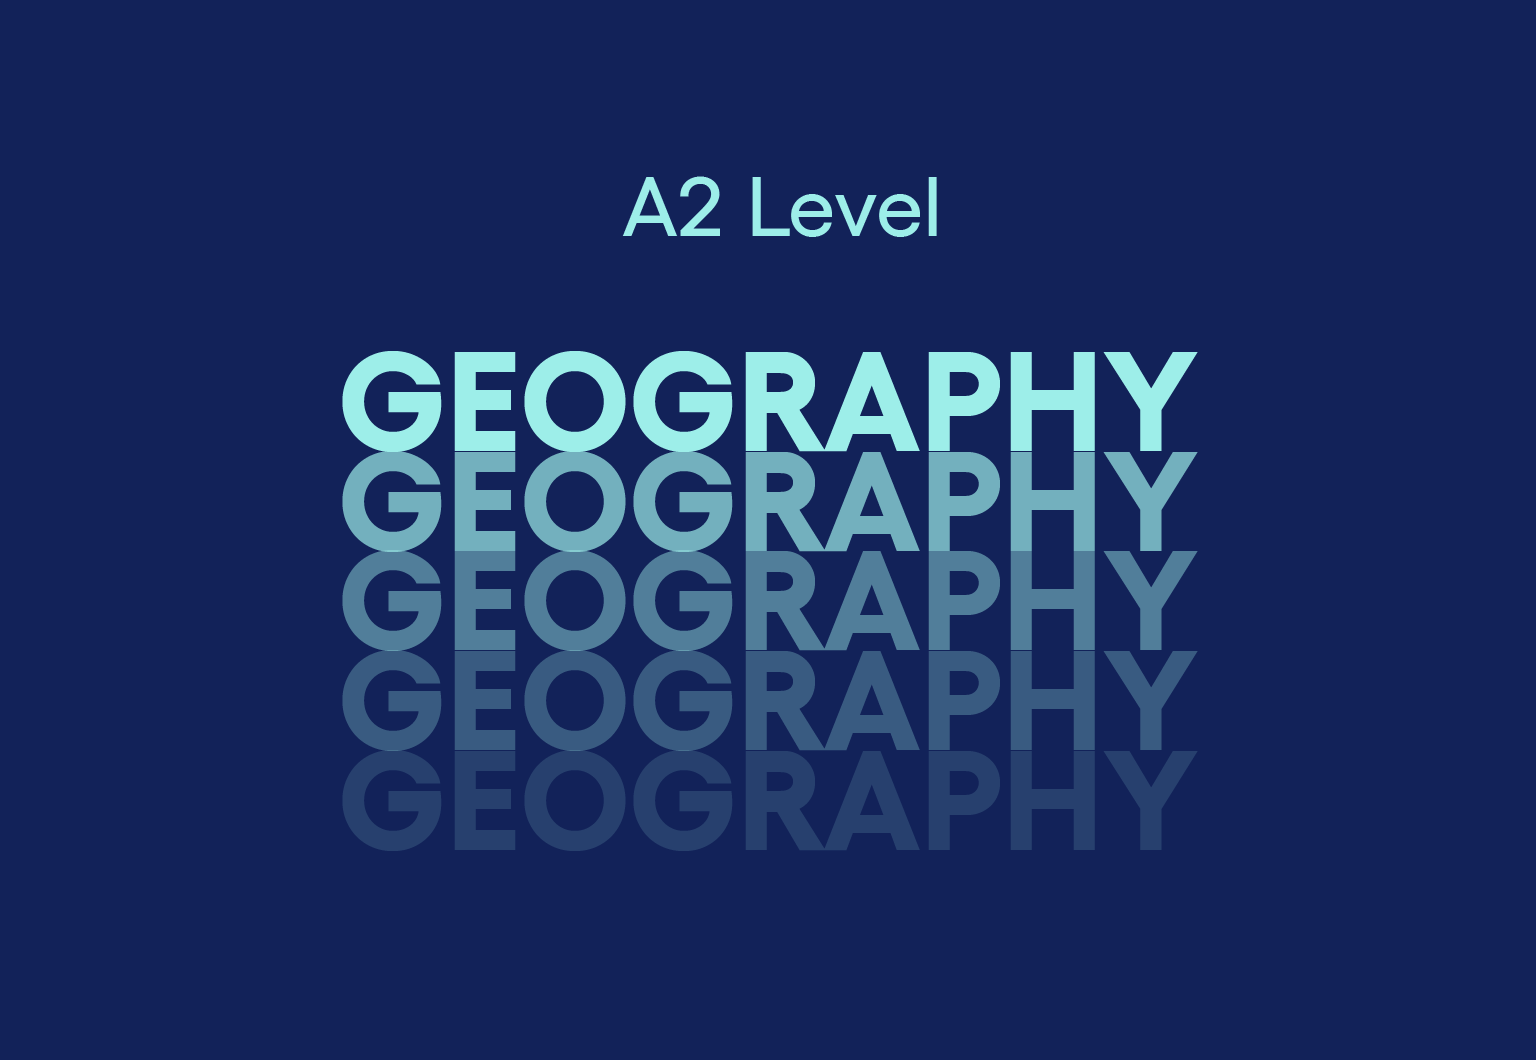 A2 Level Geography